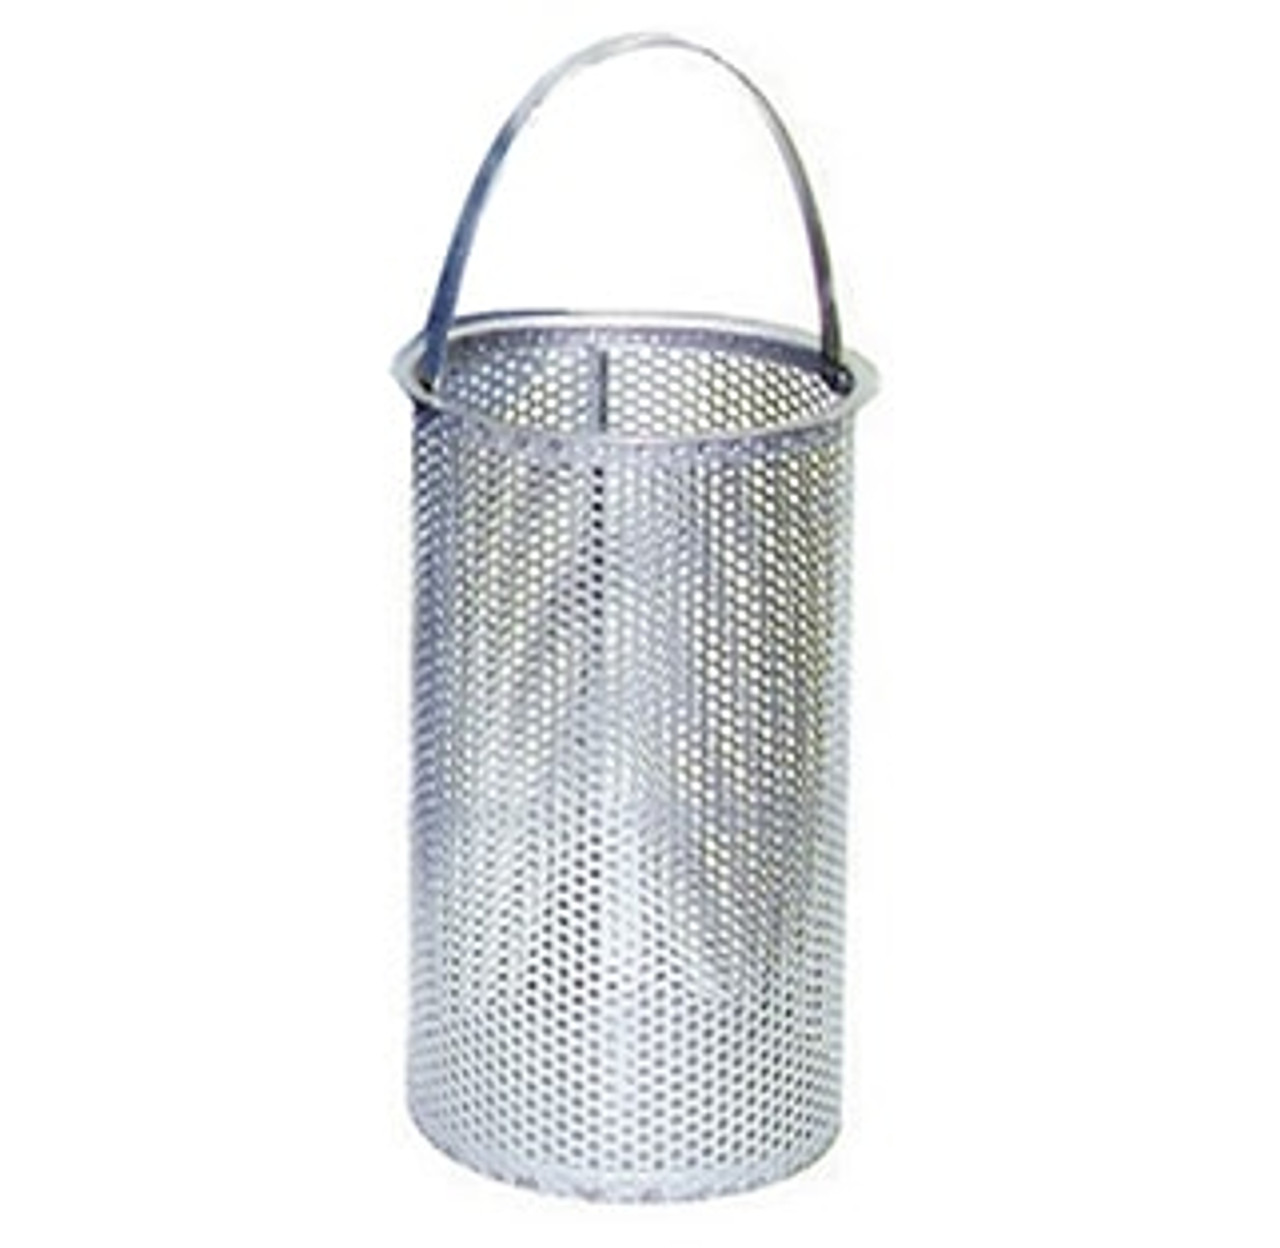 80 Mesh and 5/32" Perforation Replacement Basket for 8" Eaton Model 30R Strainer